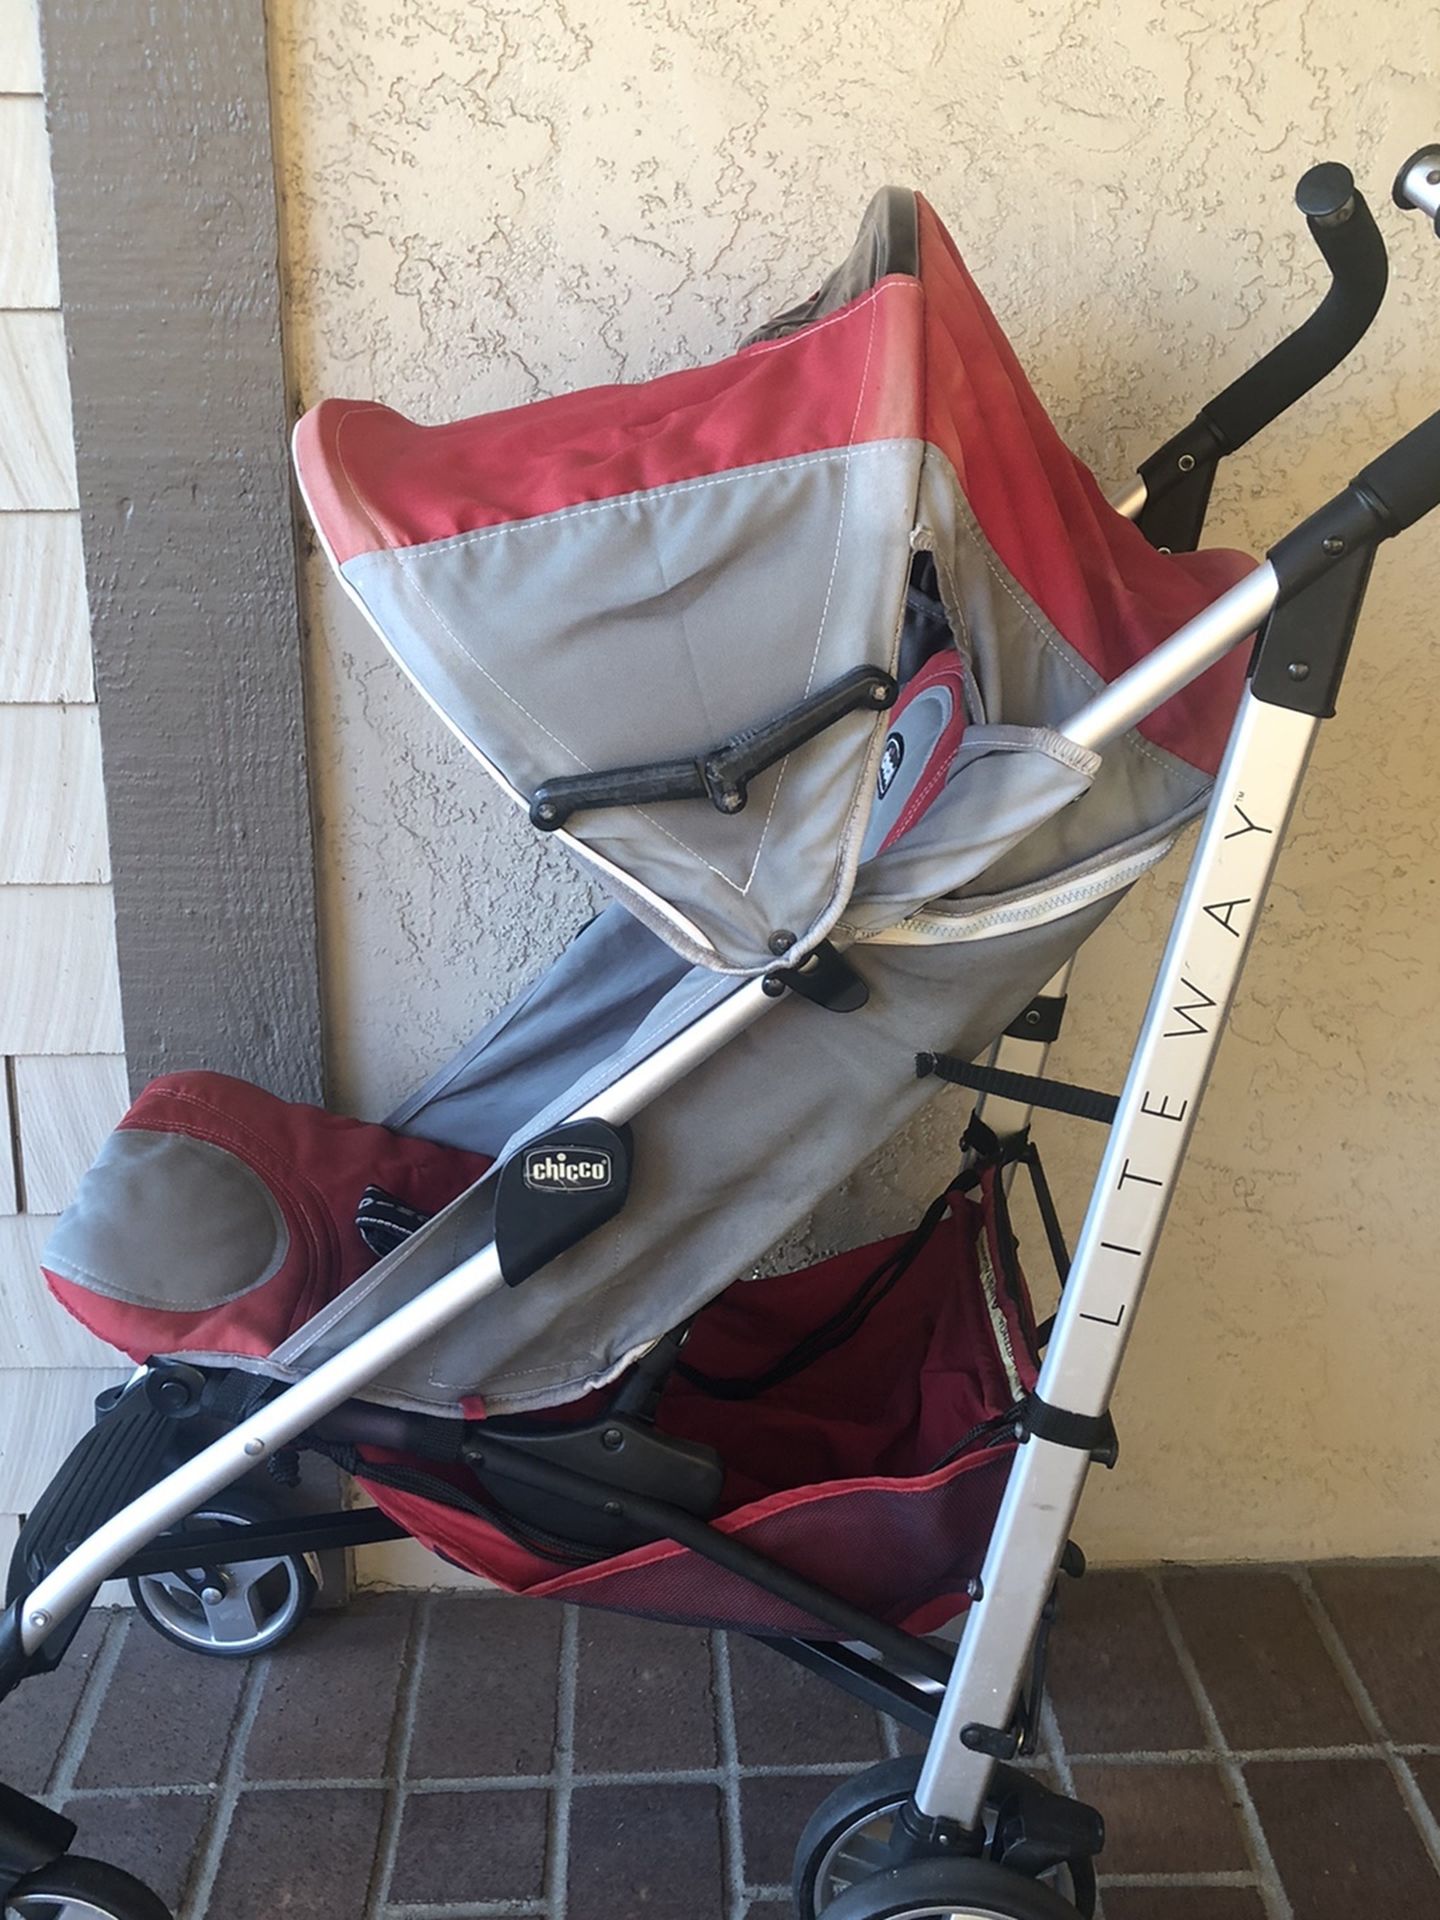 Chicco Liteway Stroller, Red